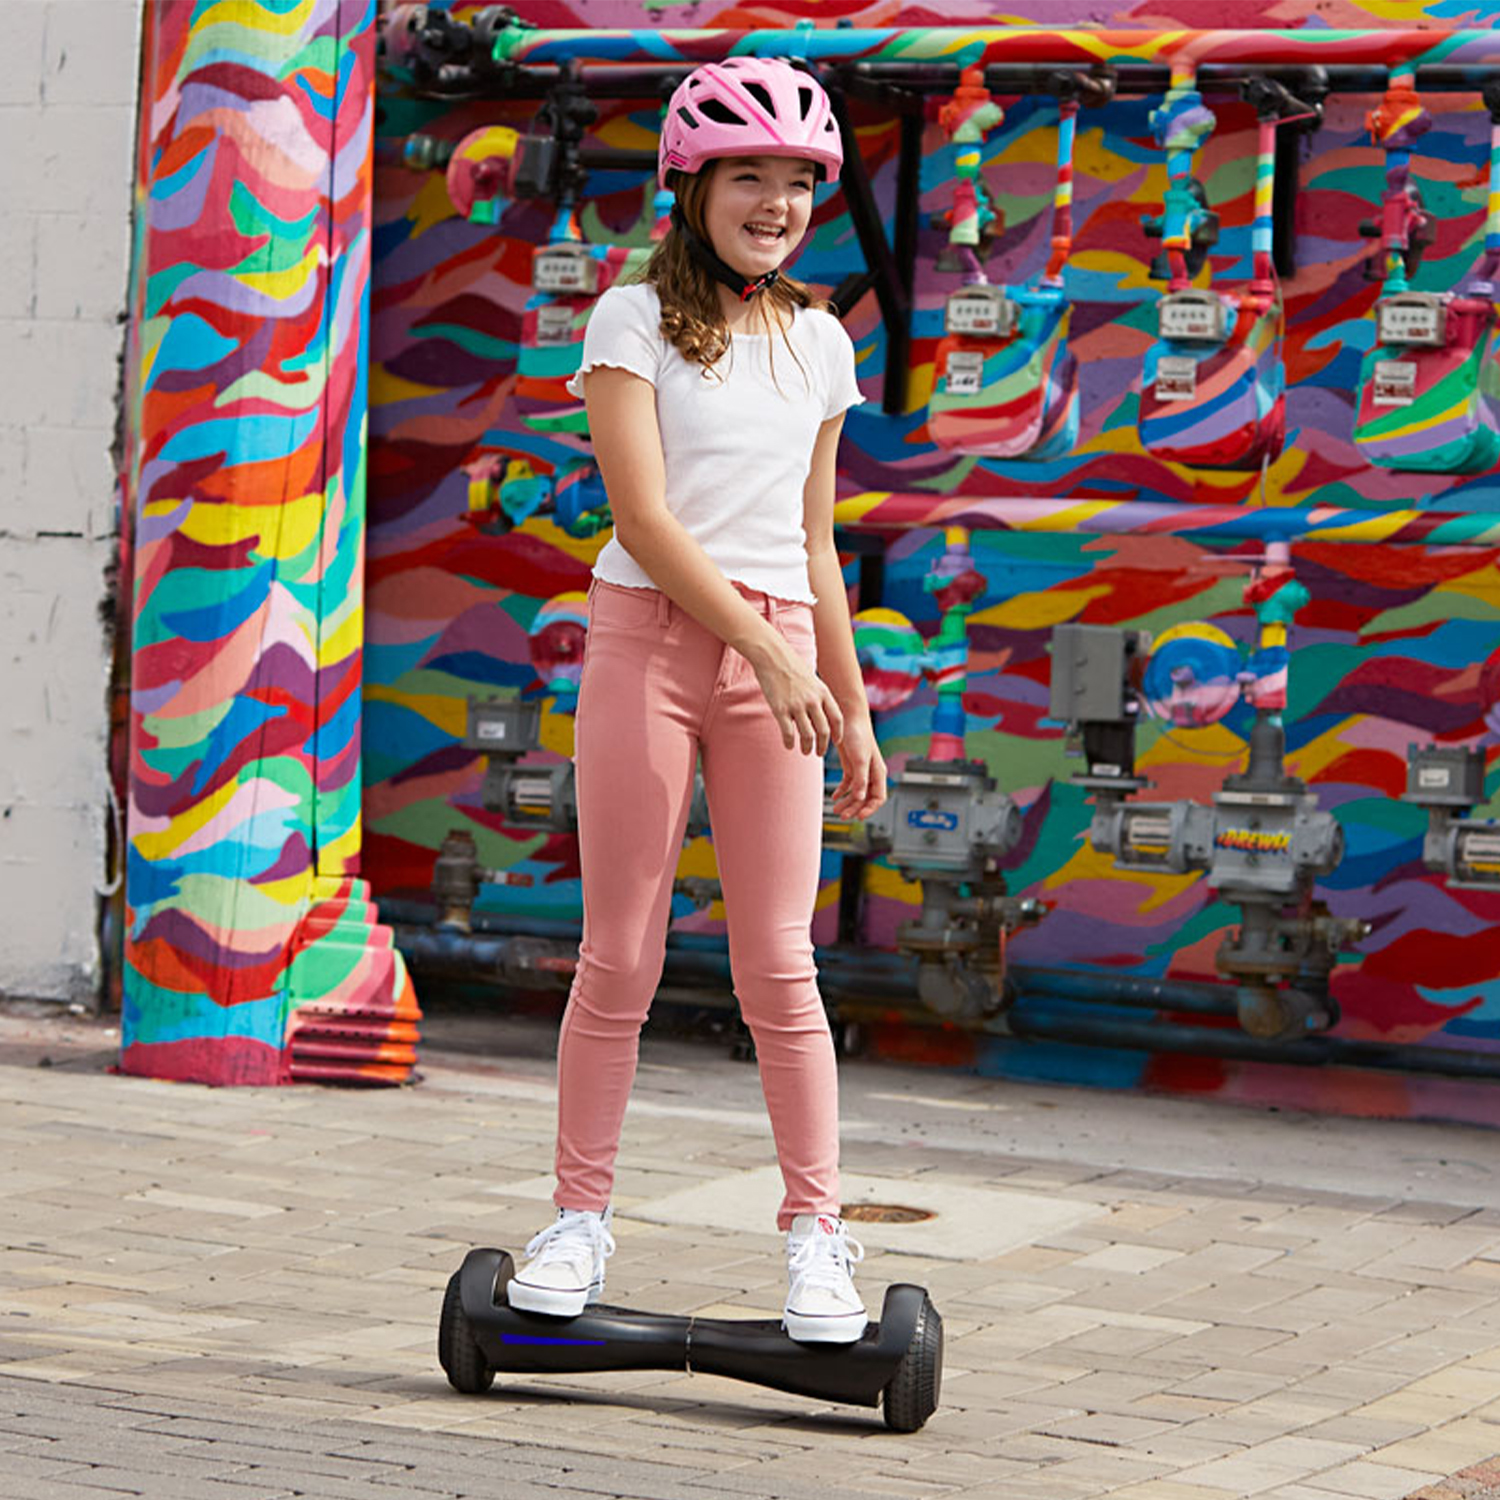 GOTRAX FX3 Hoverboard for Kids Adults 200W Motor 6.5" LED Wheels 6.2mph Top Speed, Pink - image 4 of 12